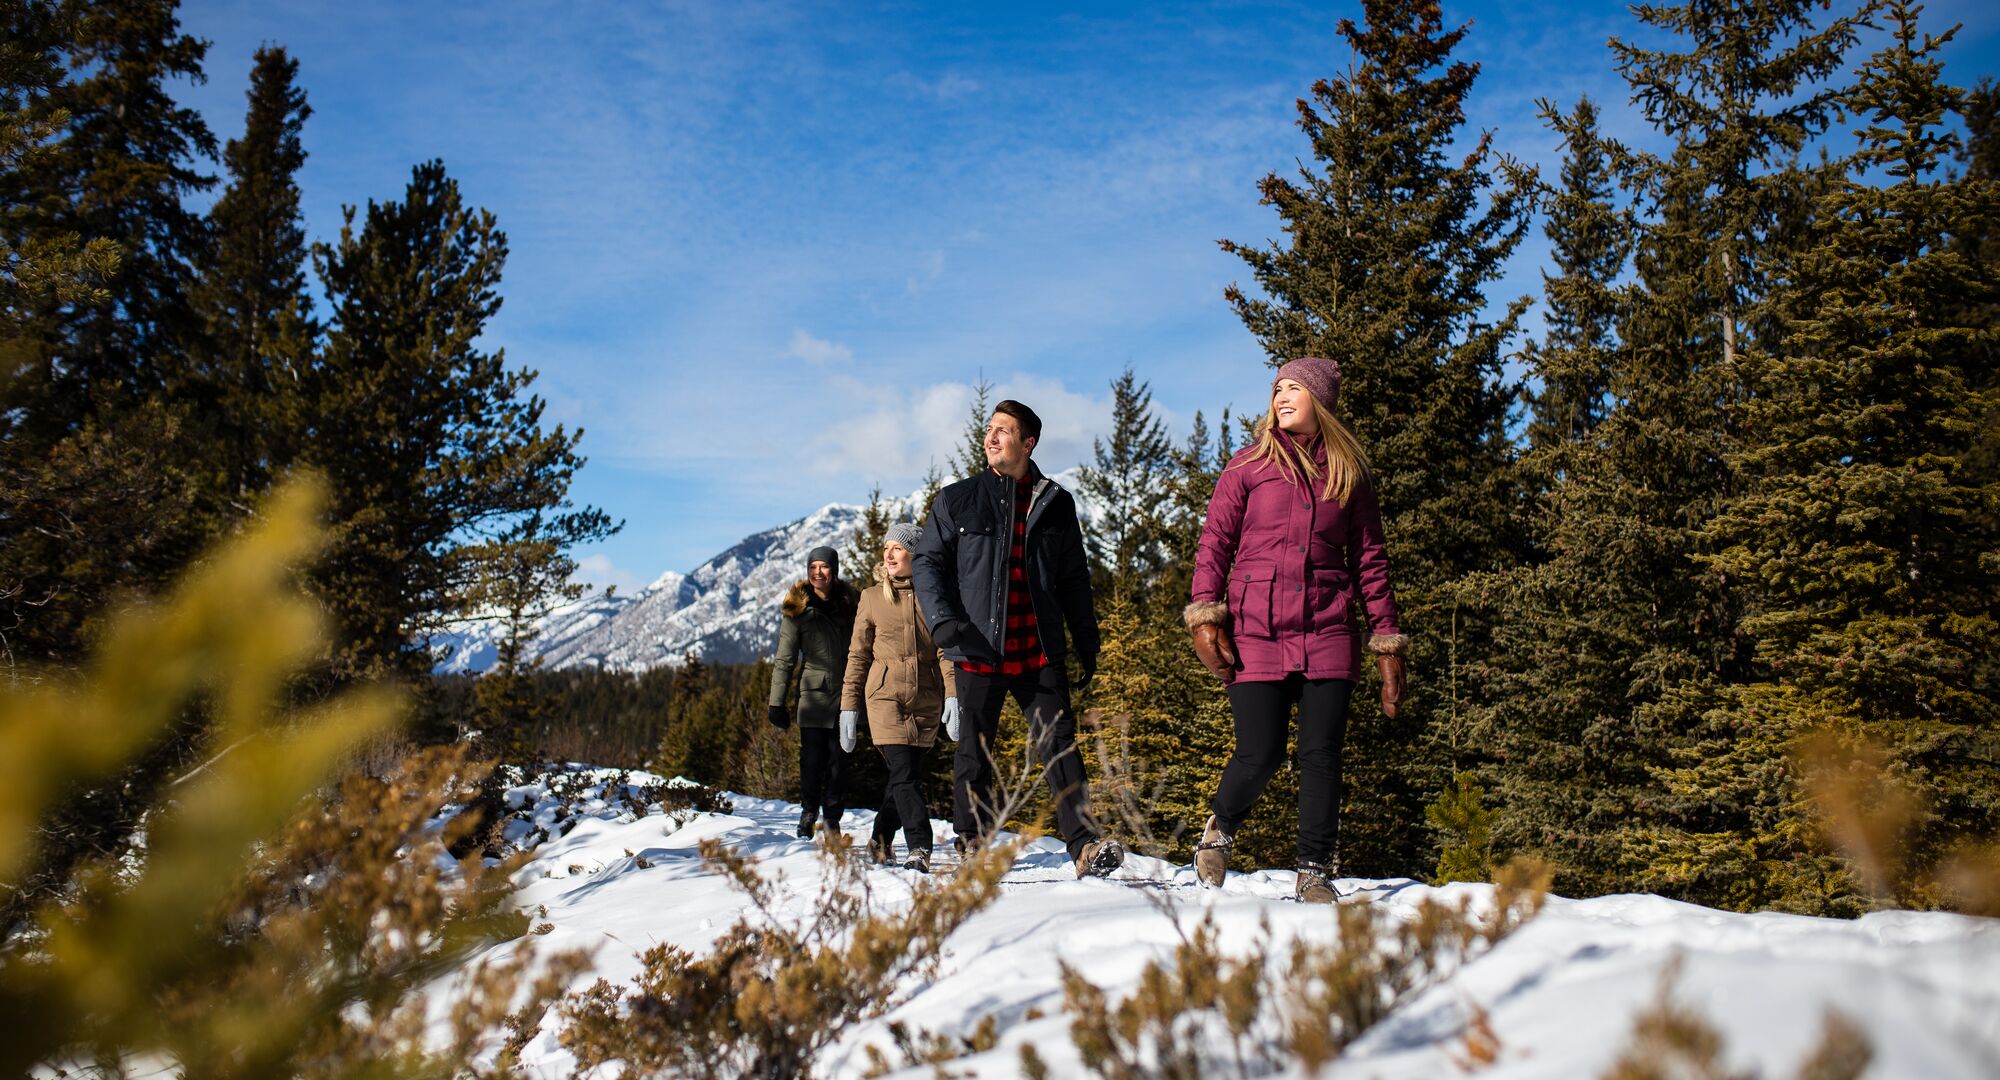 Group of four friends hiking the hoodoos trail in the winter in Banff National Park